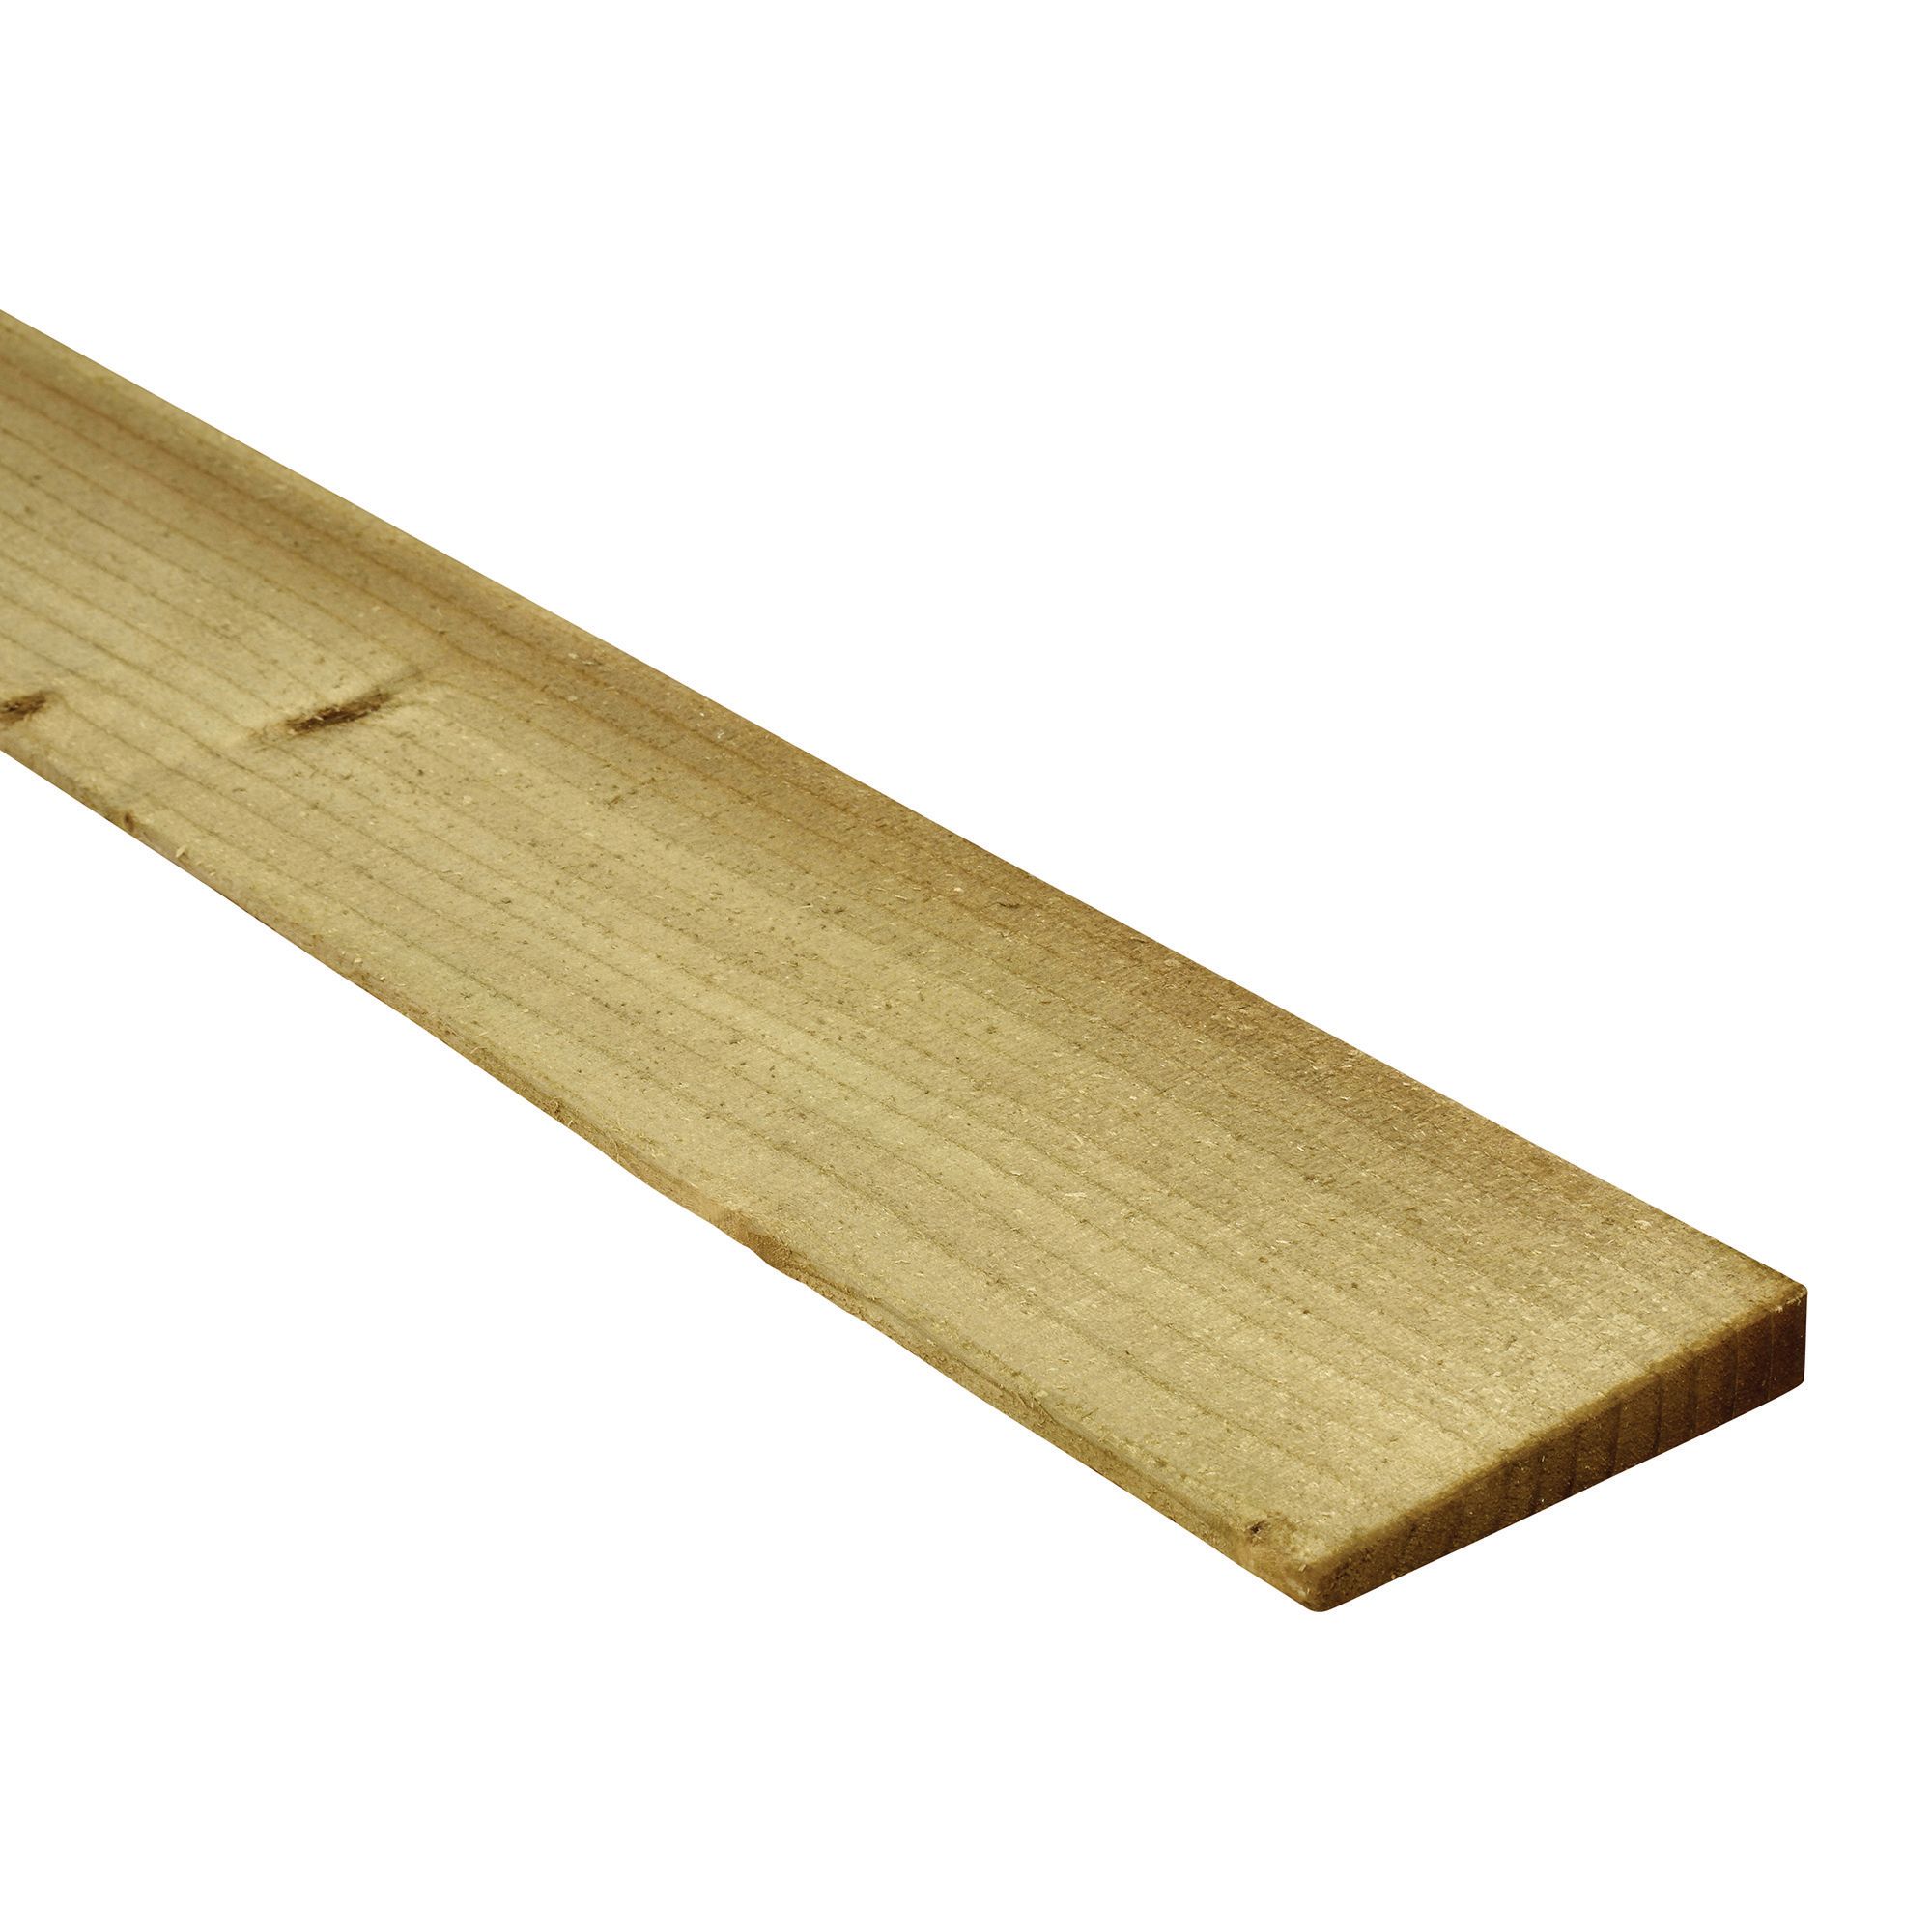 Image of Wickes Feather Edge Fence Board - 100 x 11mm x 1.5m